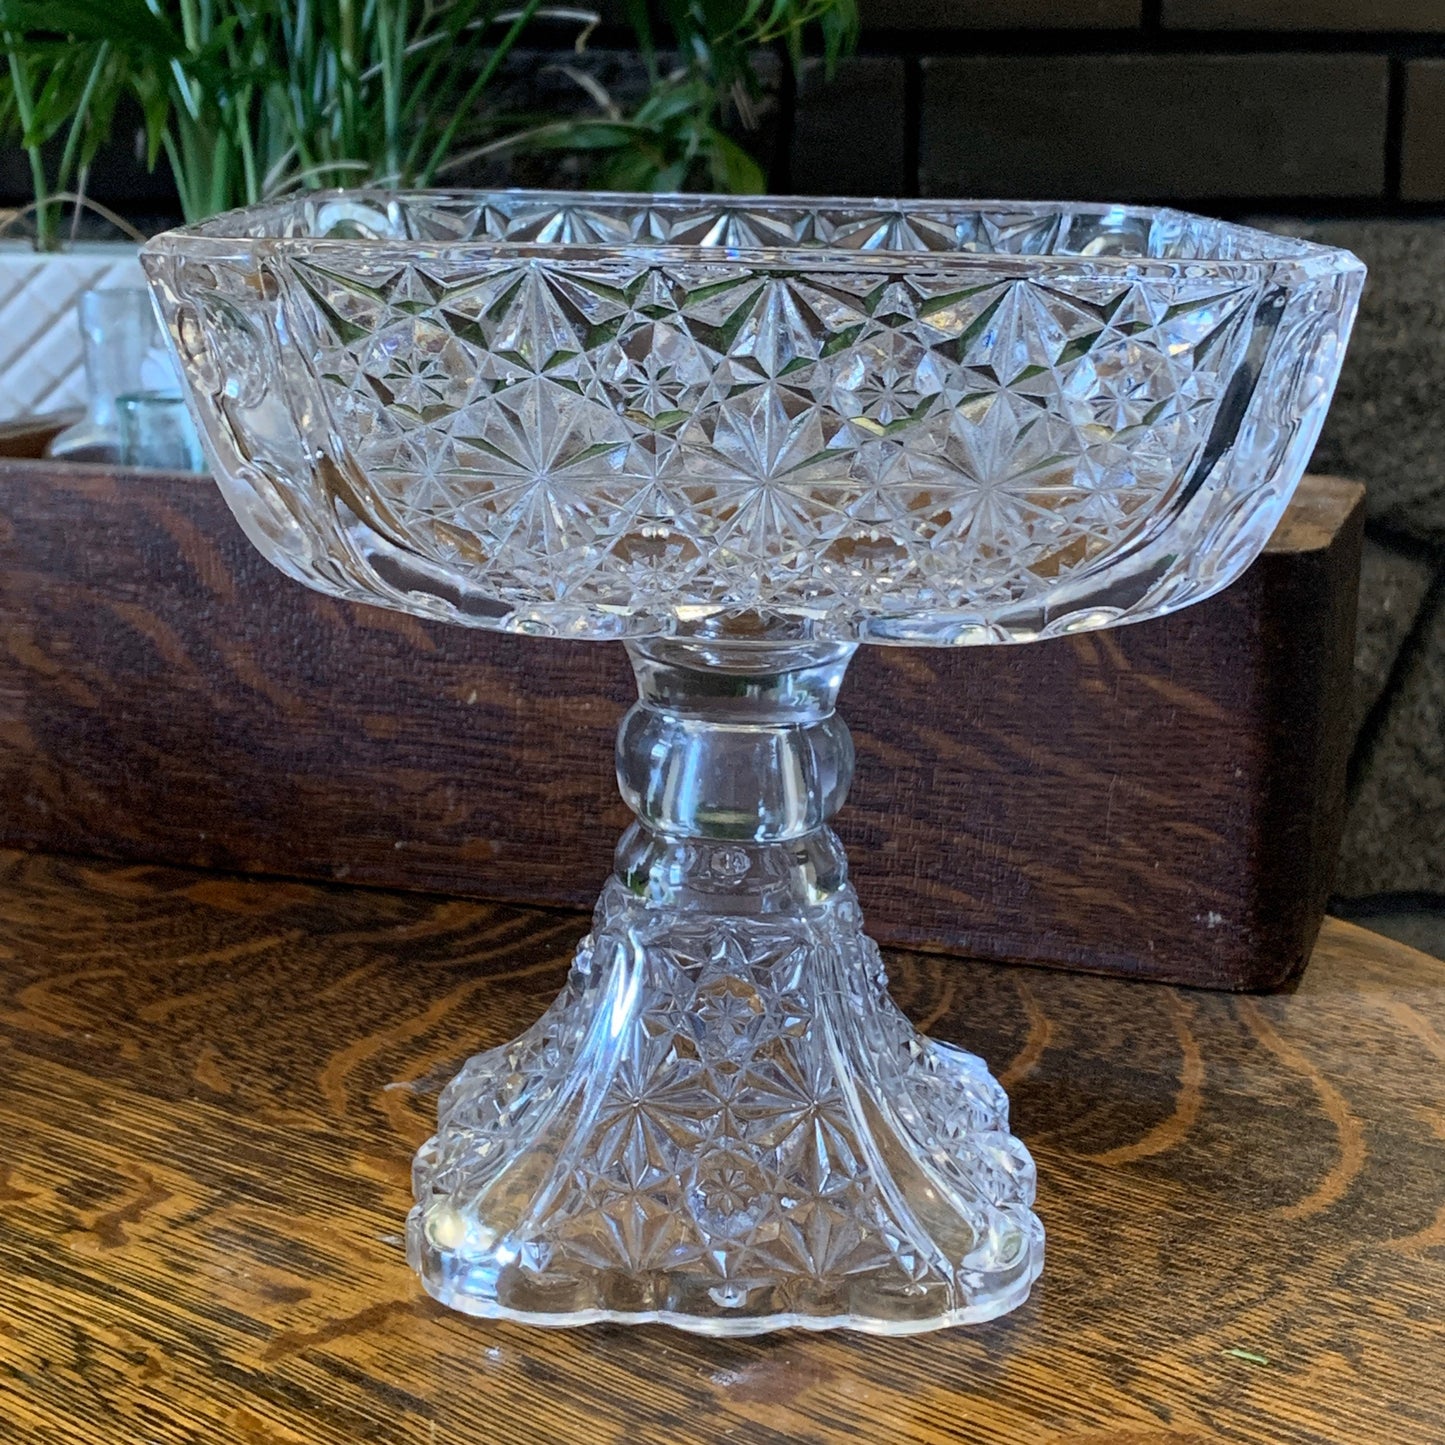 Tall Pressed Glass Dish, Vintage Glass Fruitbowl